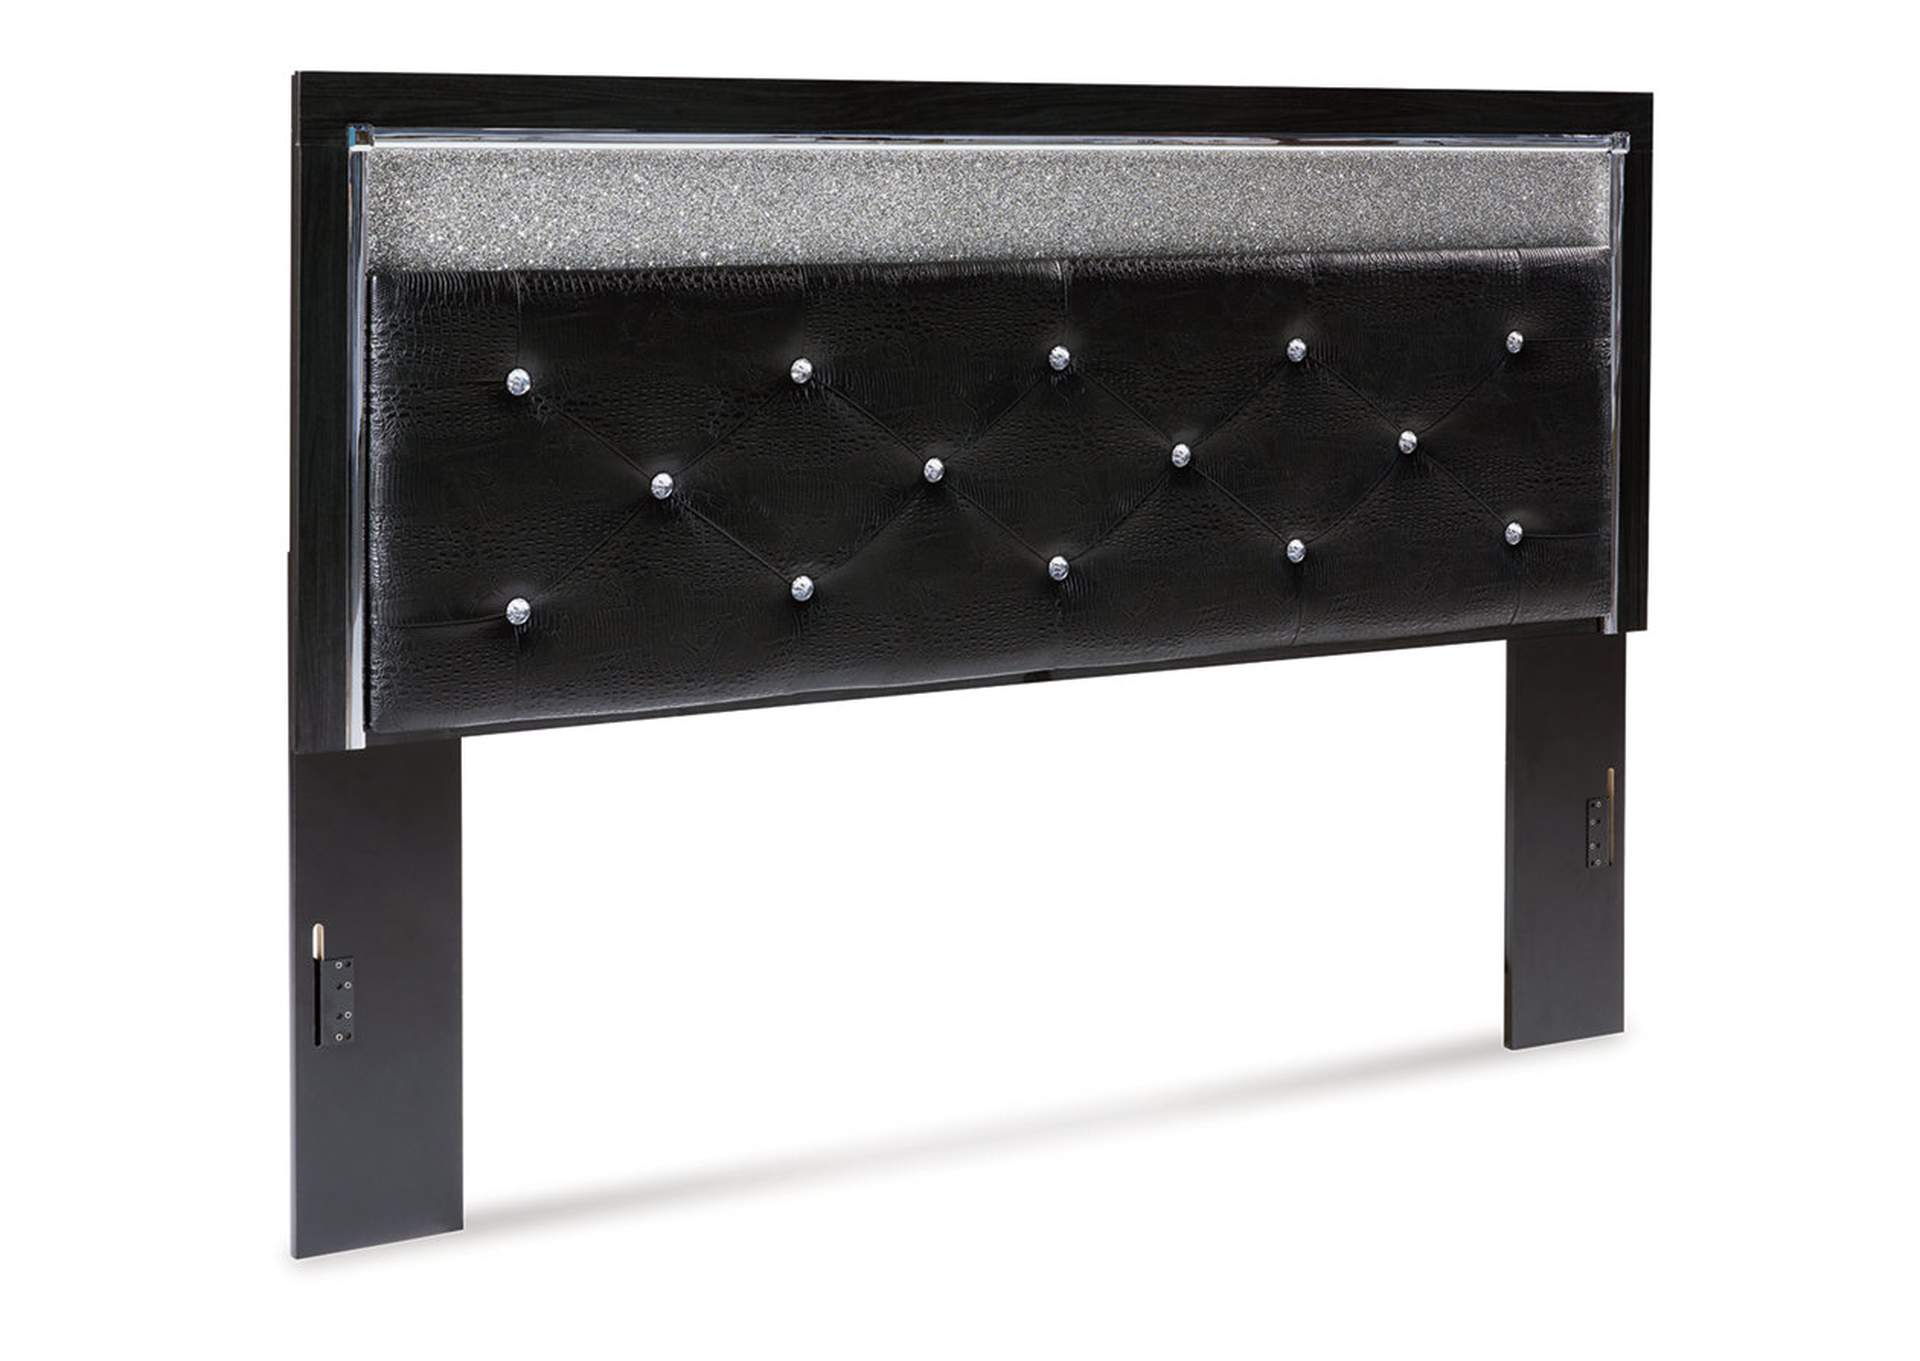 Kaydell King Upholstered Panel Bed, Dresser and Mirror,Signature Design By Ashley